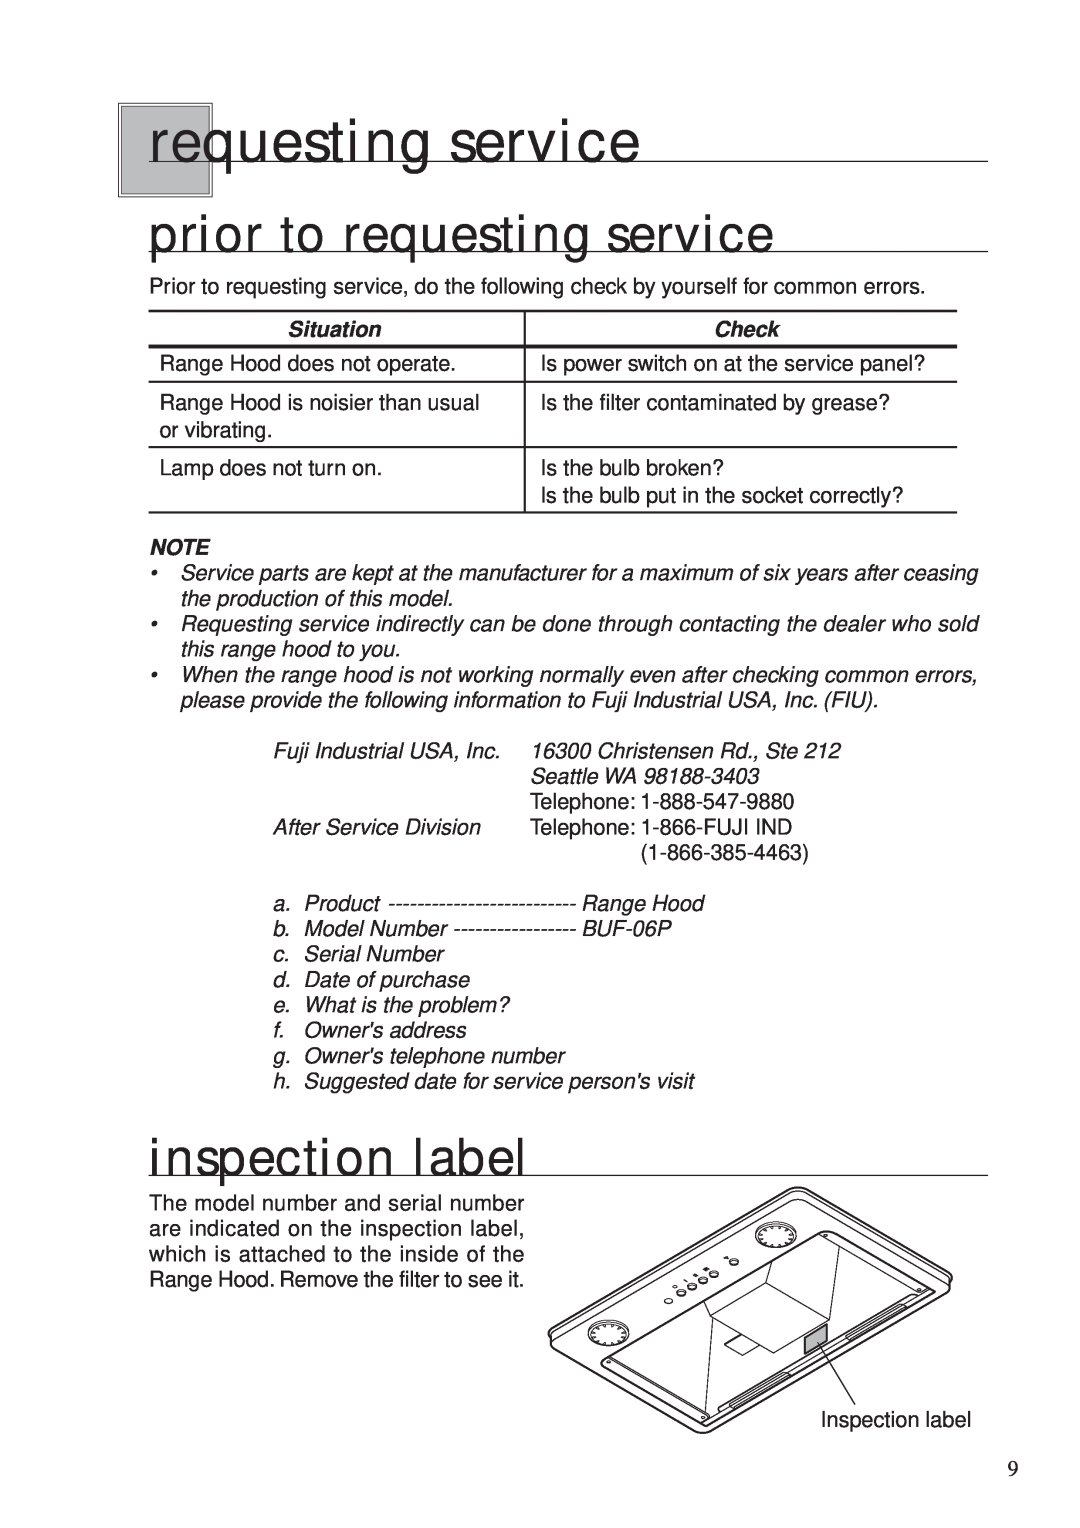 Fujioh BUF-06P operation manual prior to requesting service, inspection label, Situation, Check 